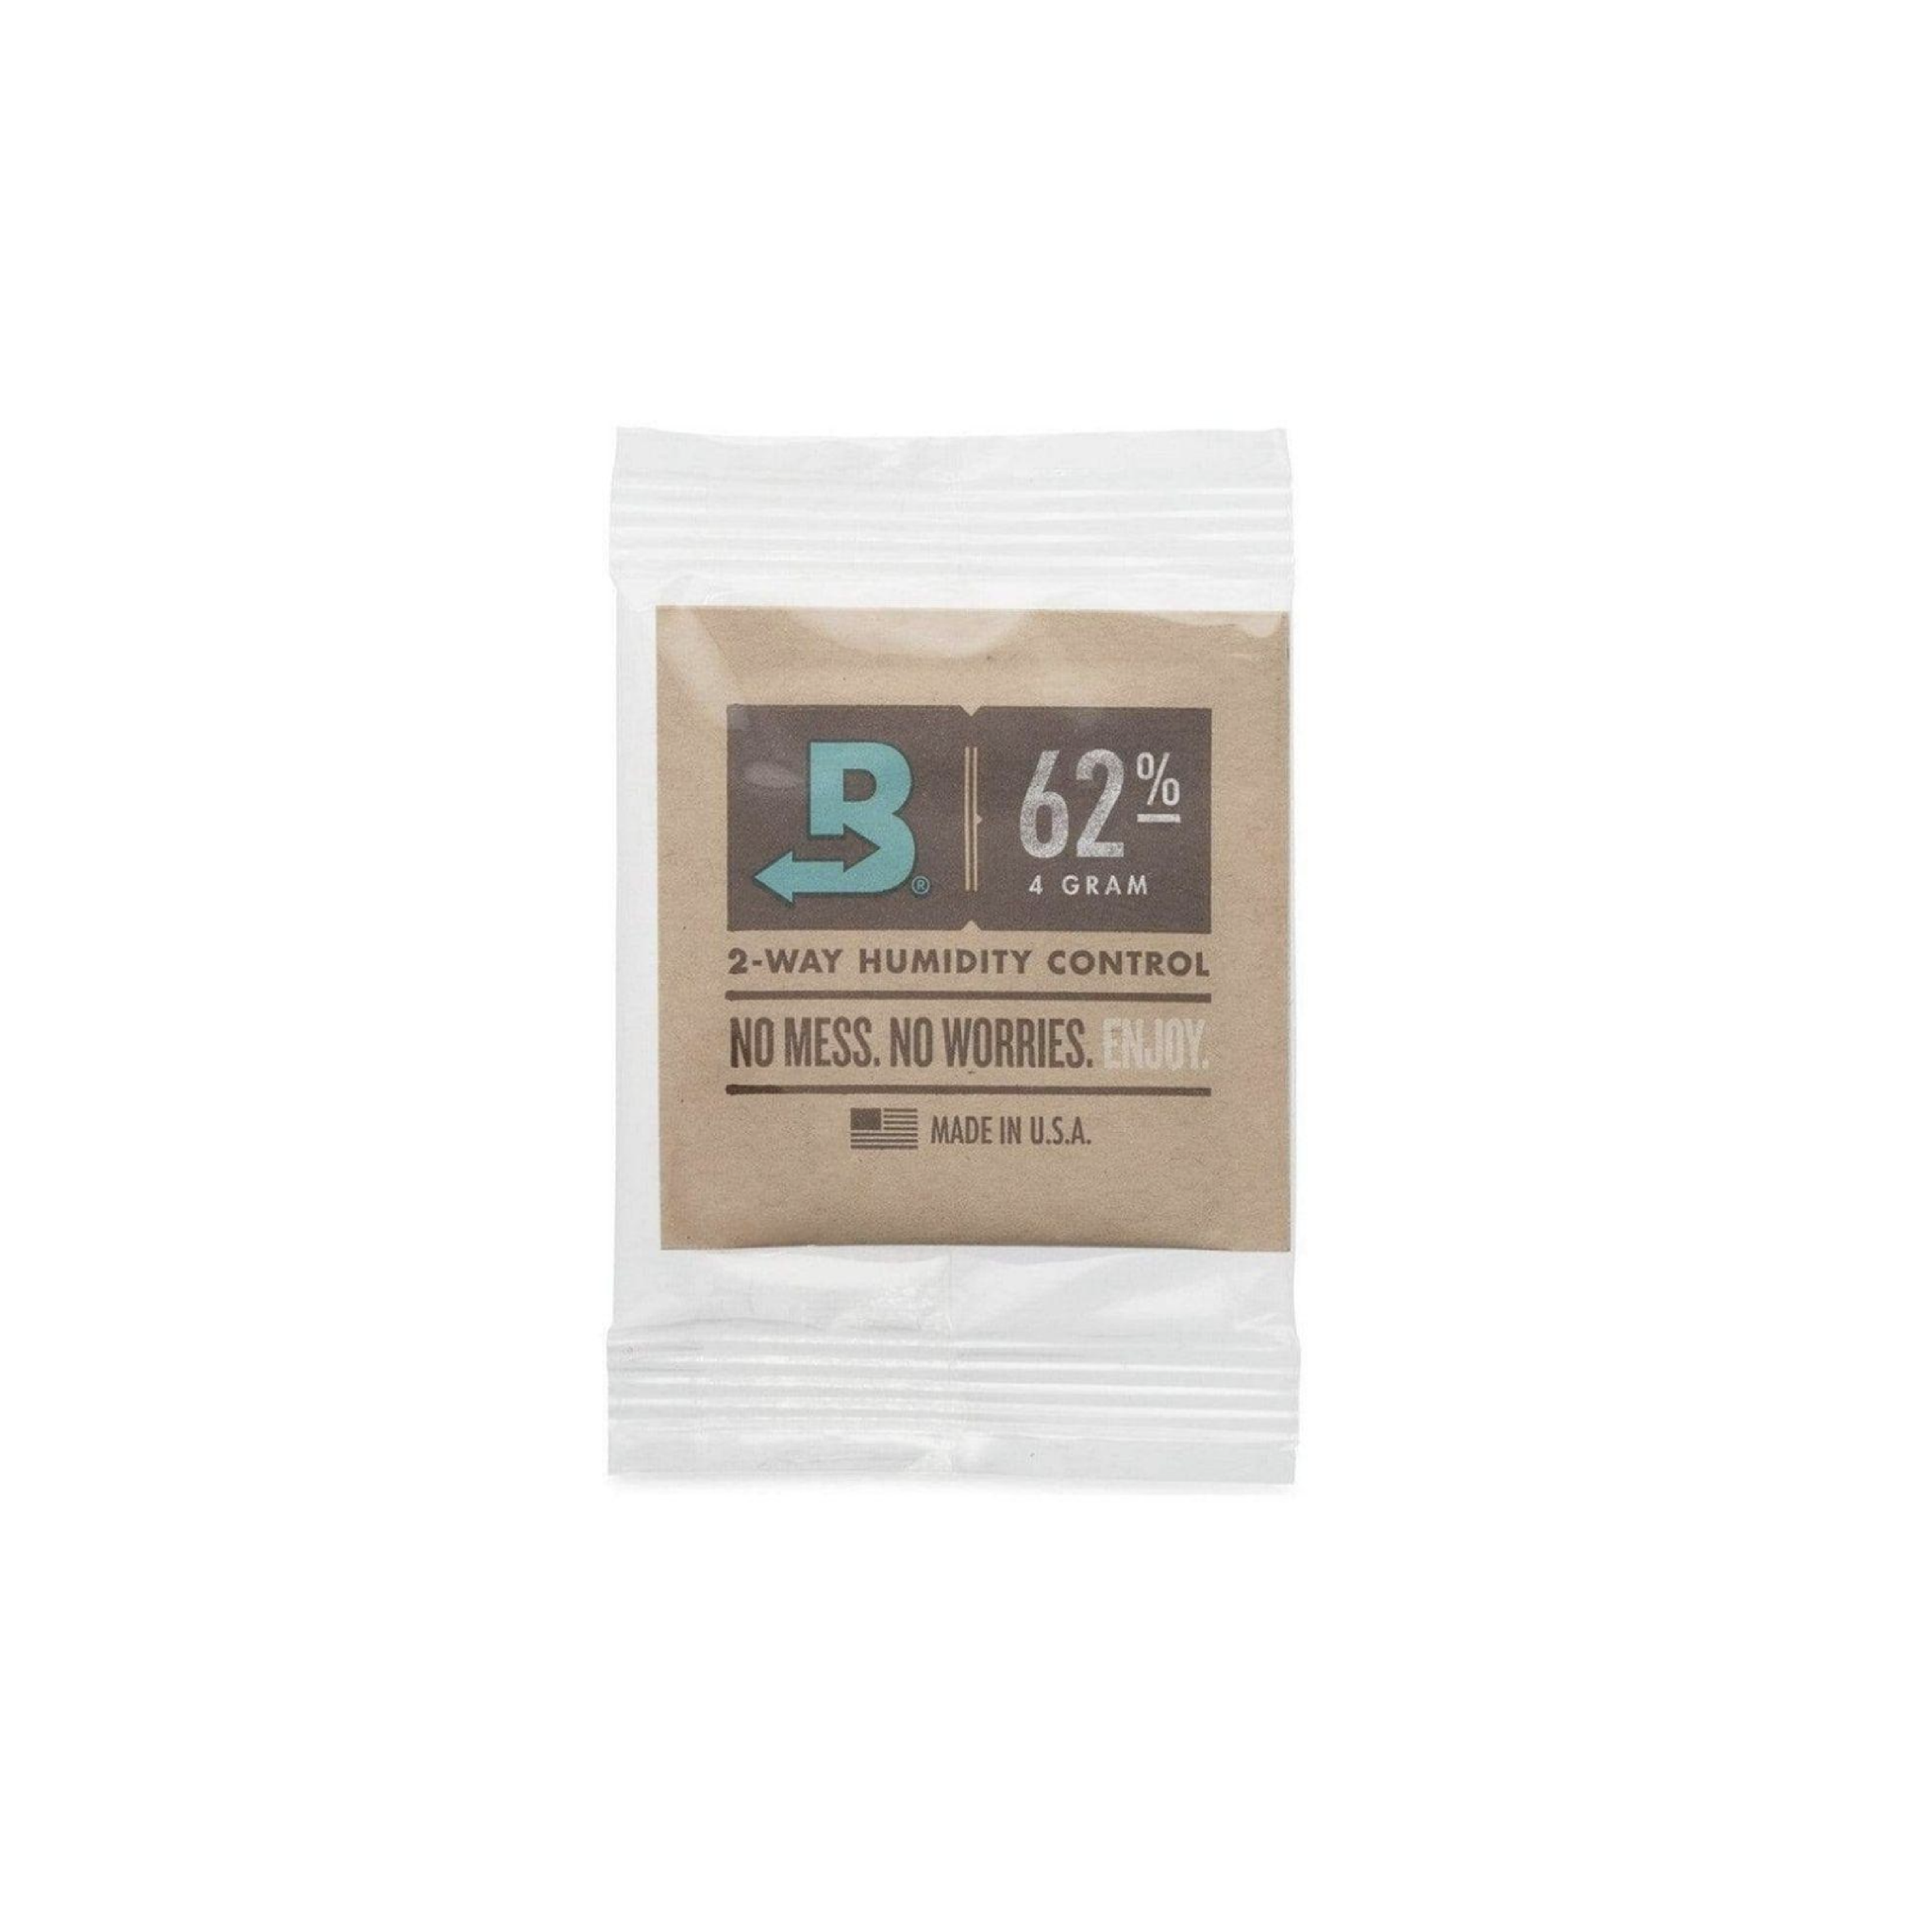 Humidity Control Pack 4G/62%